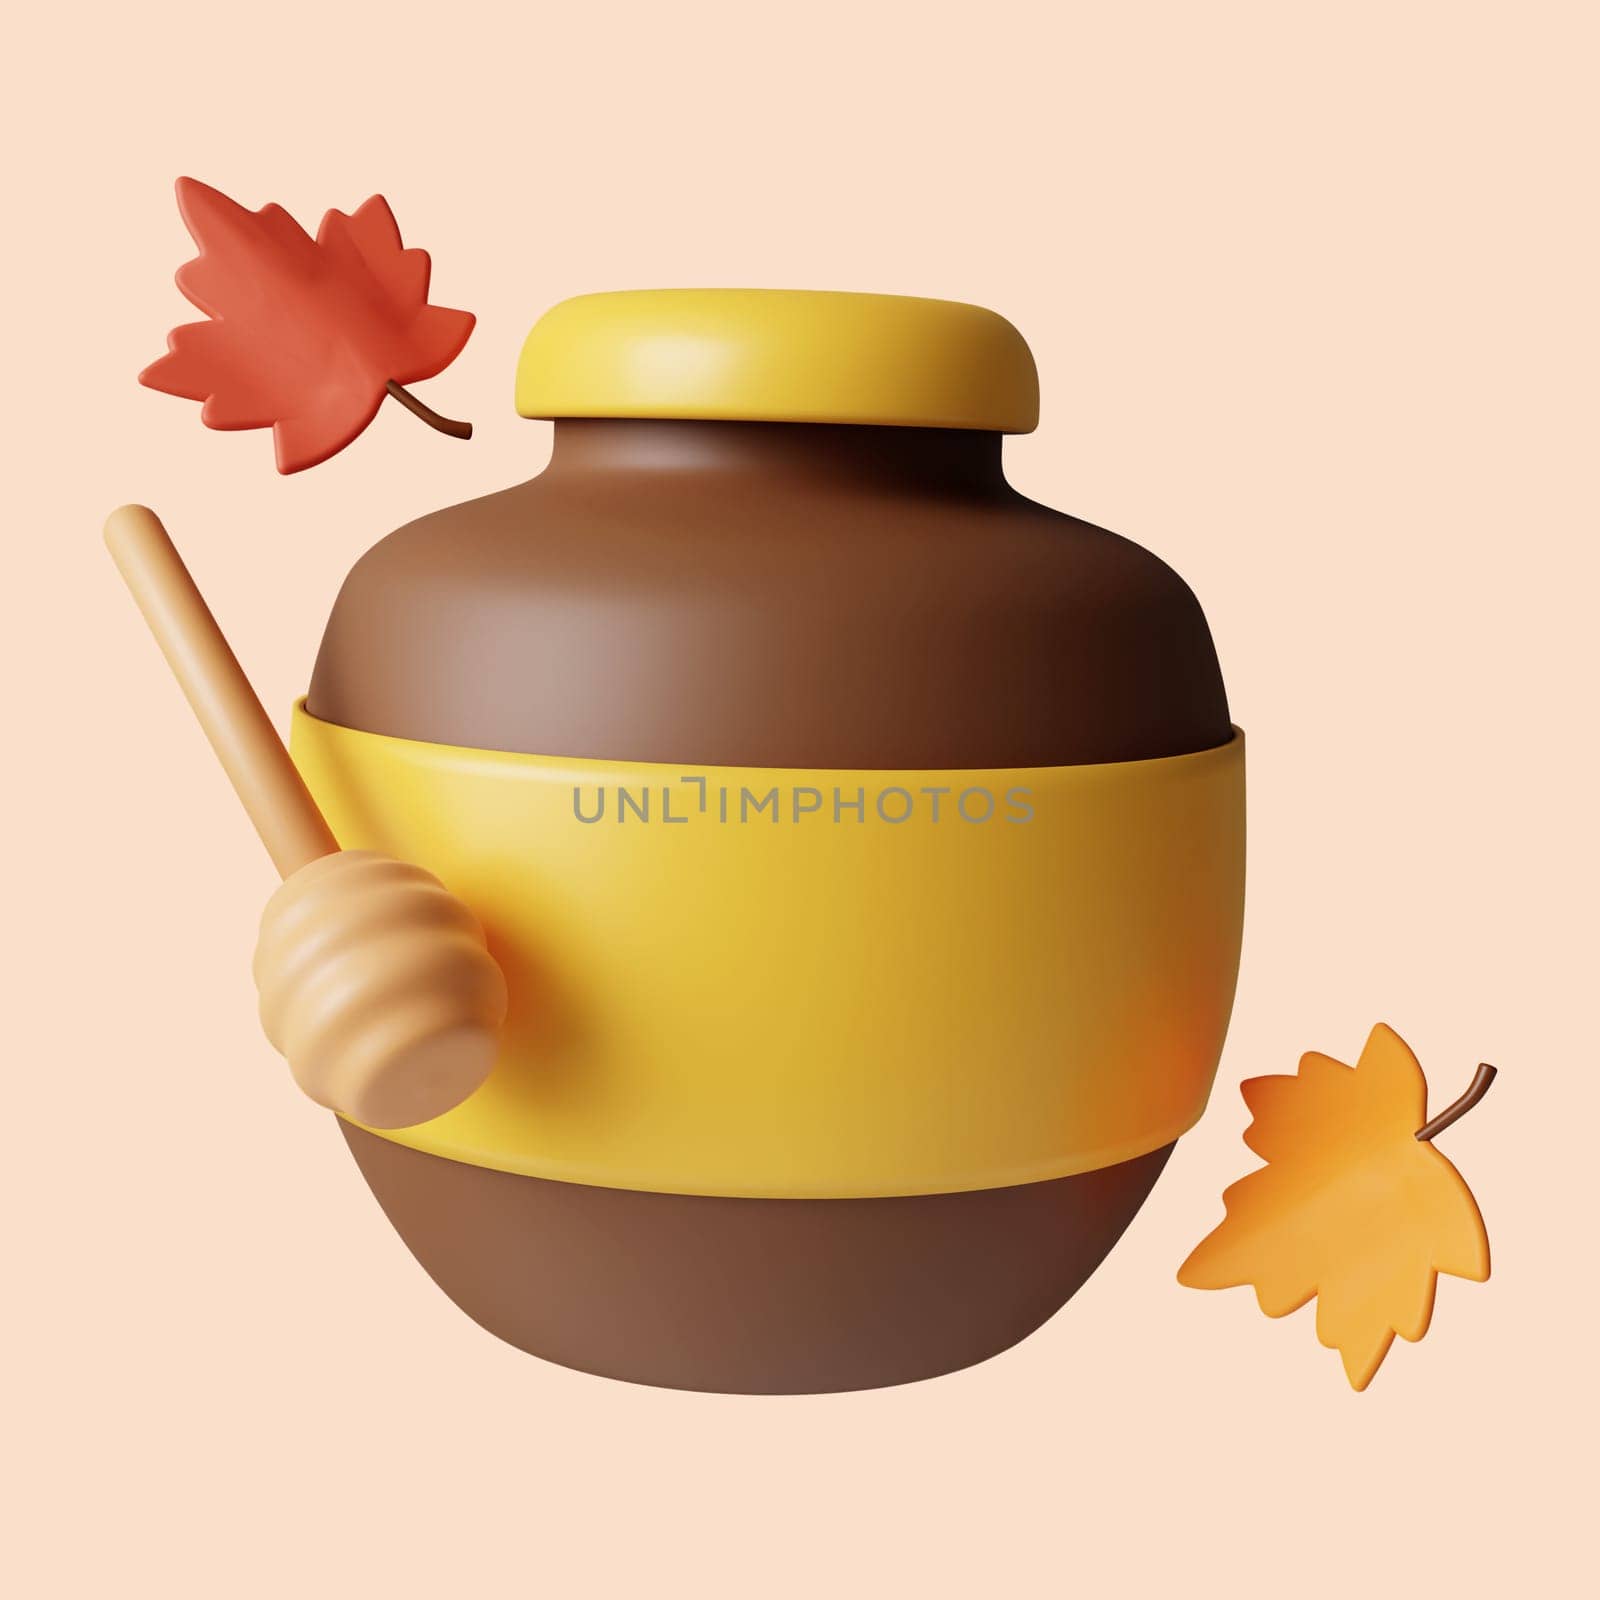 3d Autumn honey . Golden fall. Season decoration. icon isolated on gray background. 3d rendering illustration. Clipping path. by meepiangraphic